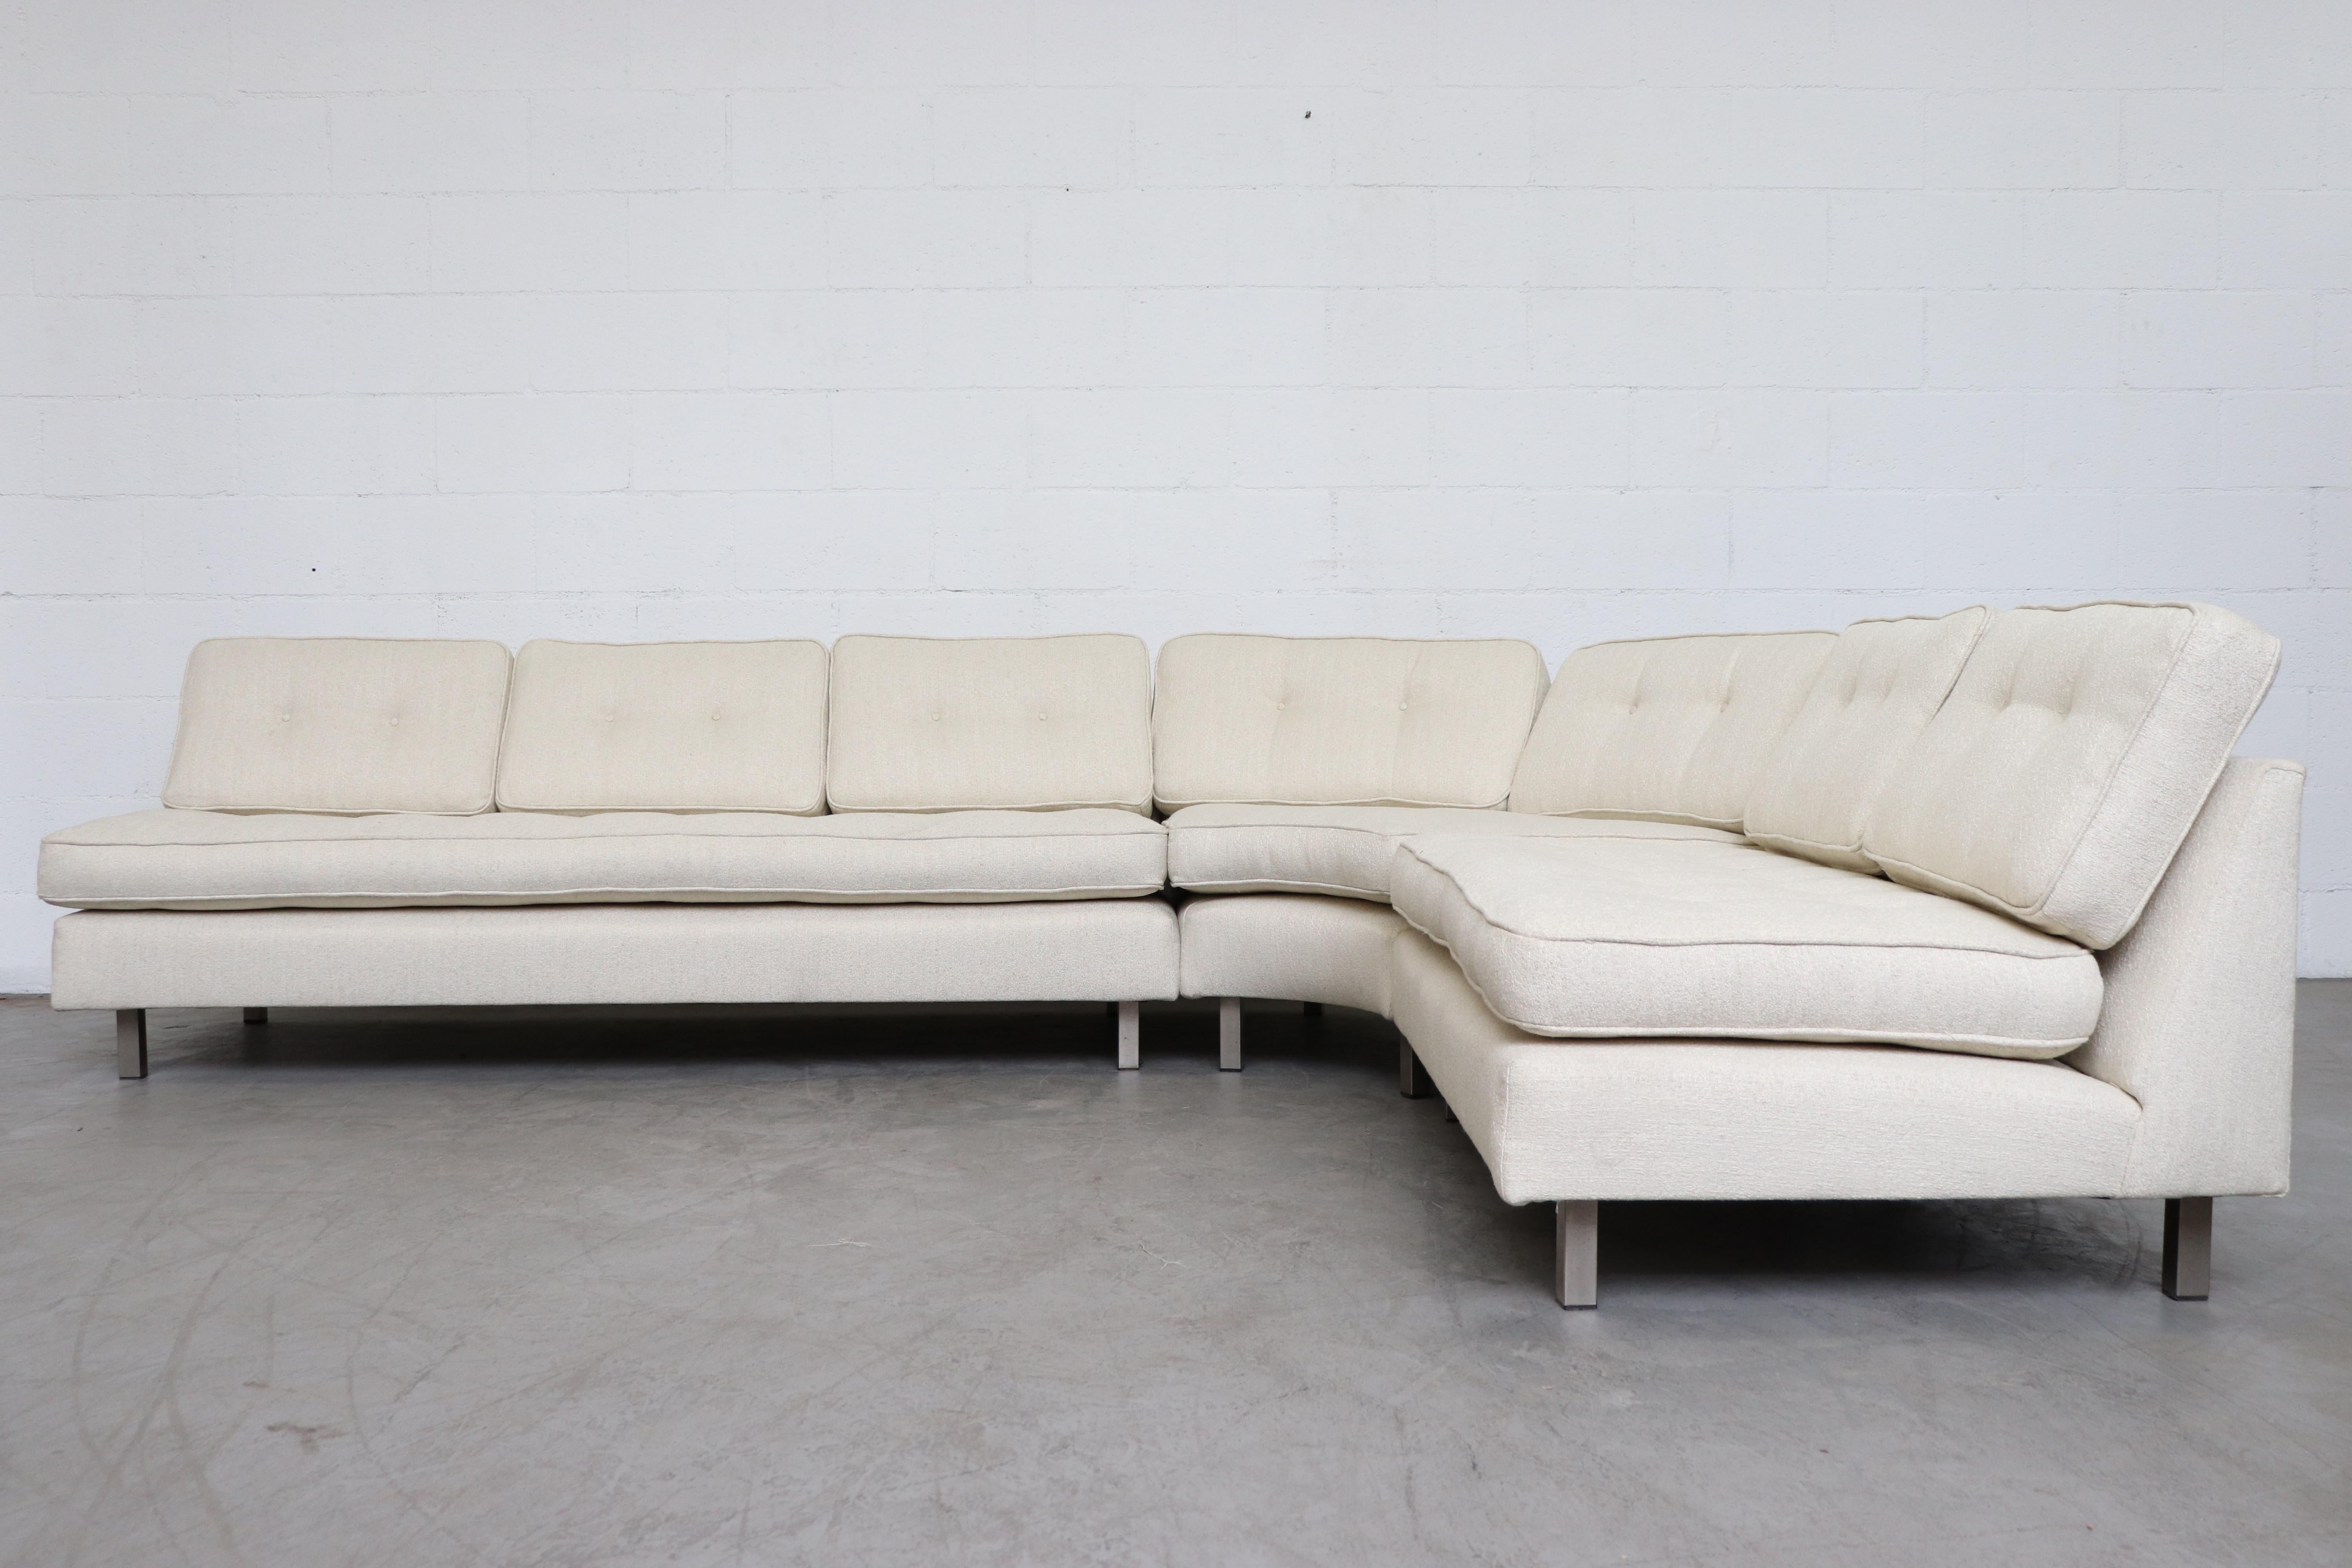 Artifort 3-piece sectional sofa. Newly upholstered in bone white fabric. Frame in original condition with wear consistent with its age and use. A similar rust leather sectional is also available and listed separately (LU9224818214).